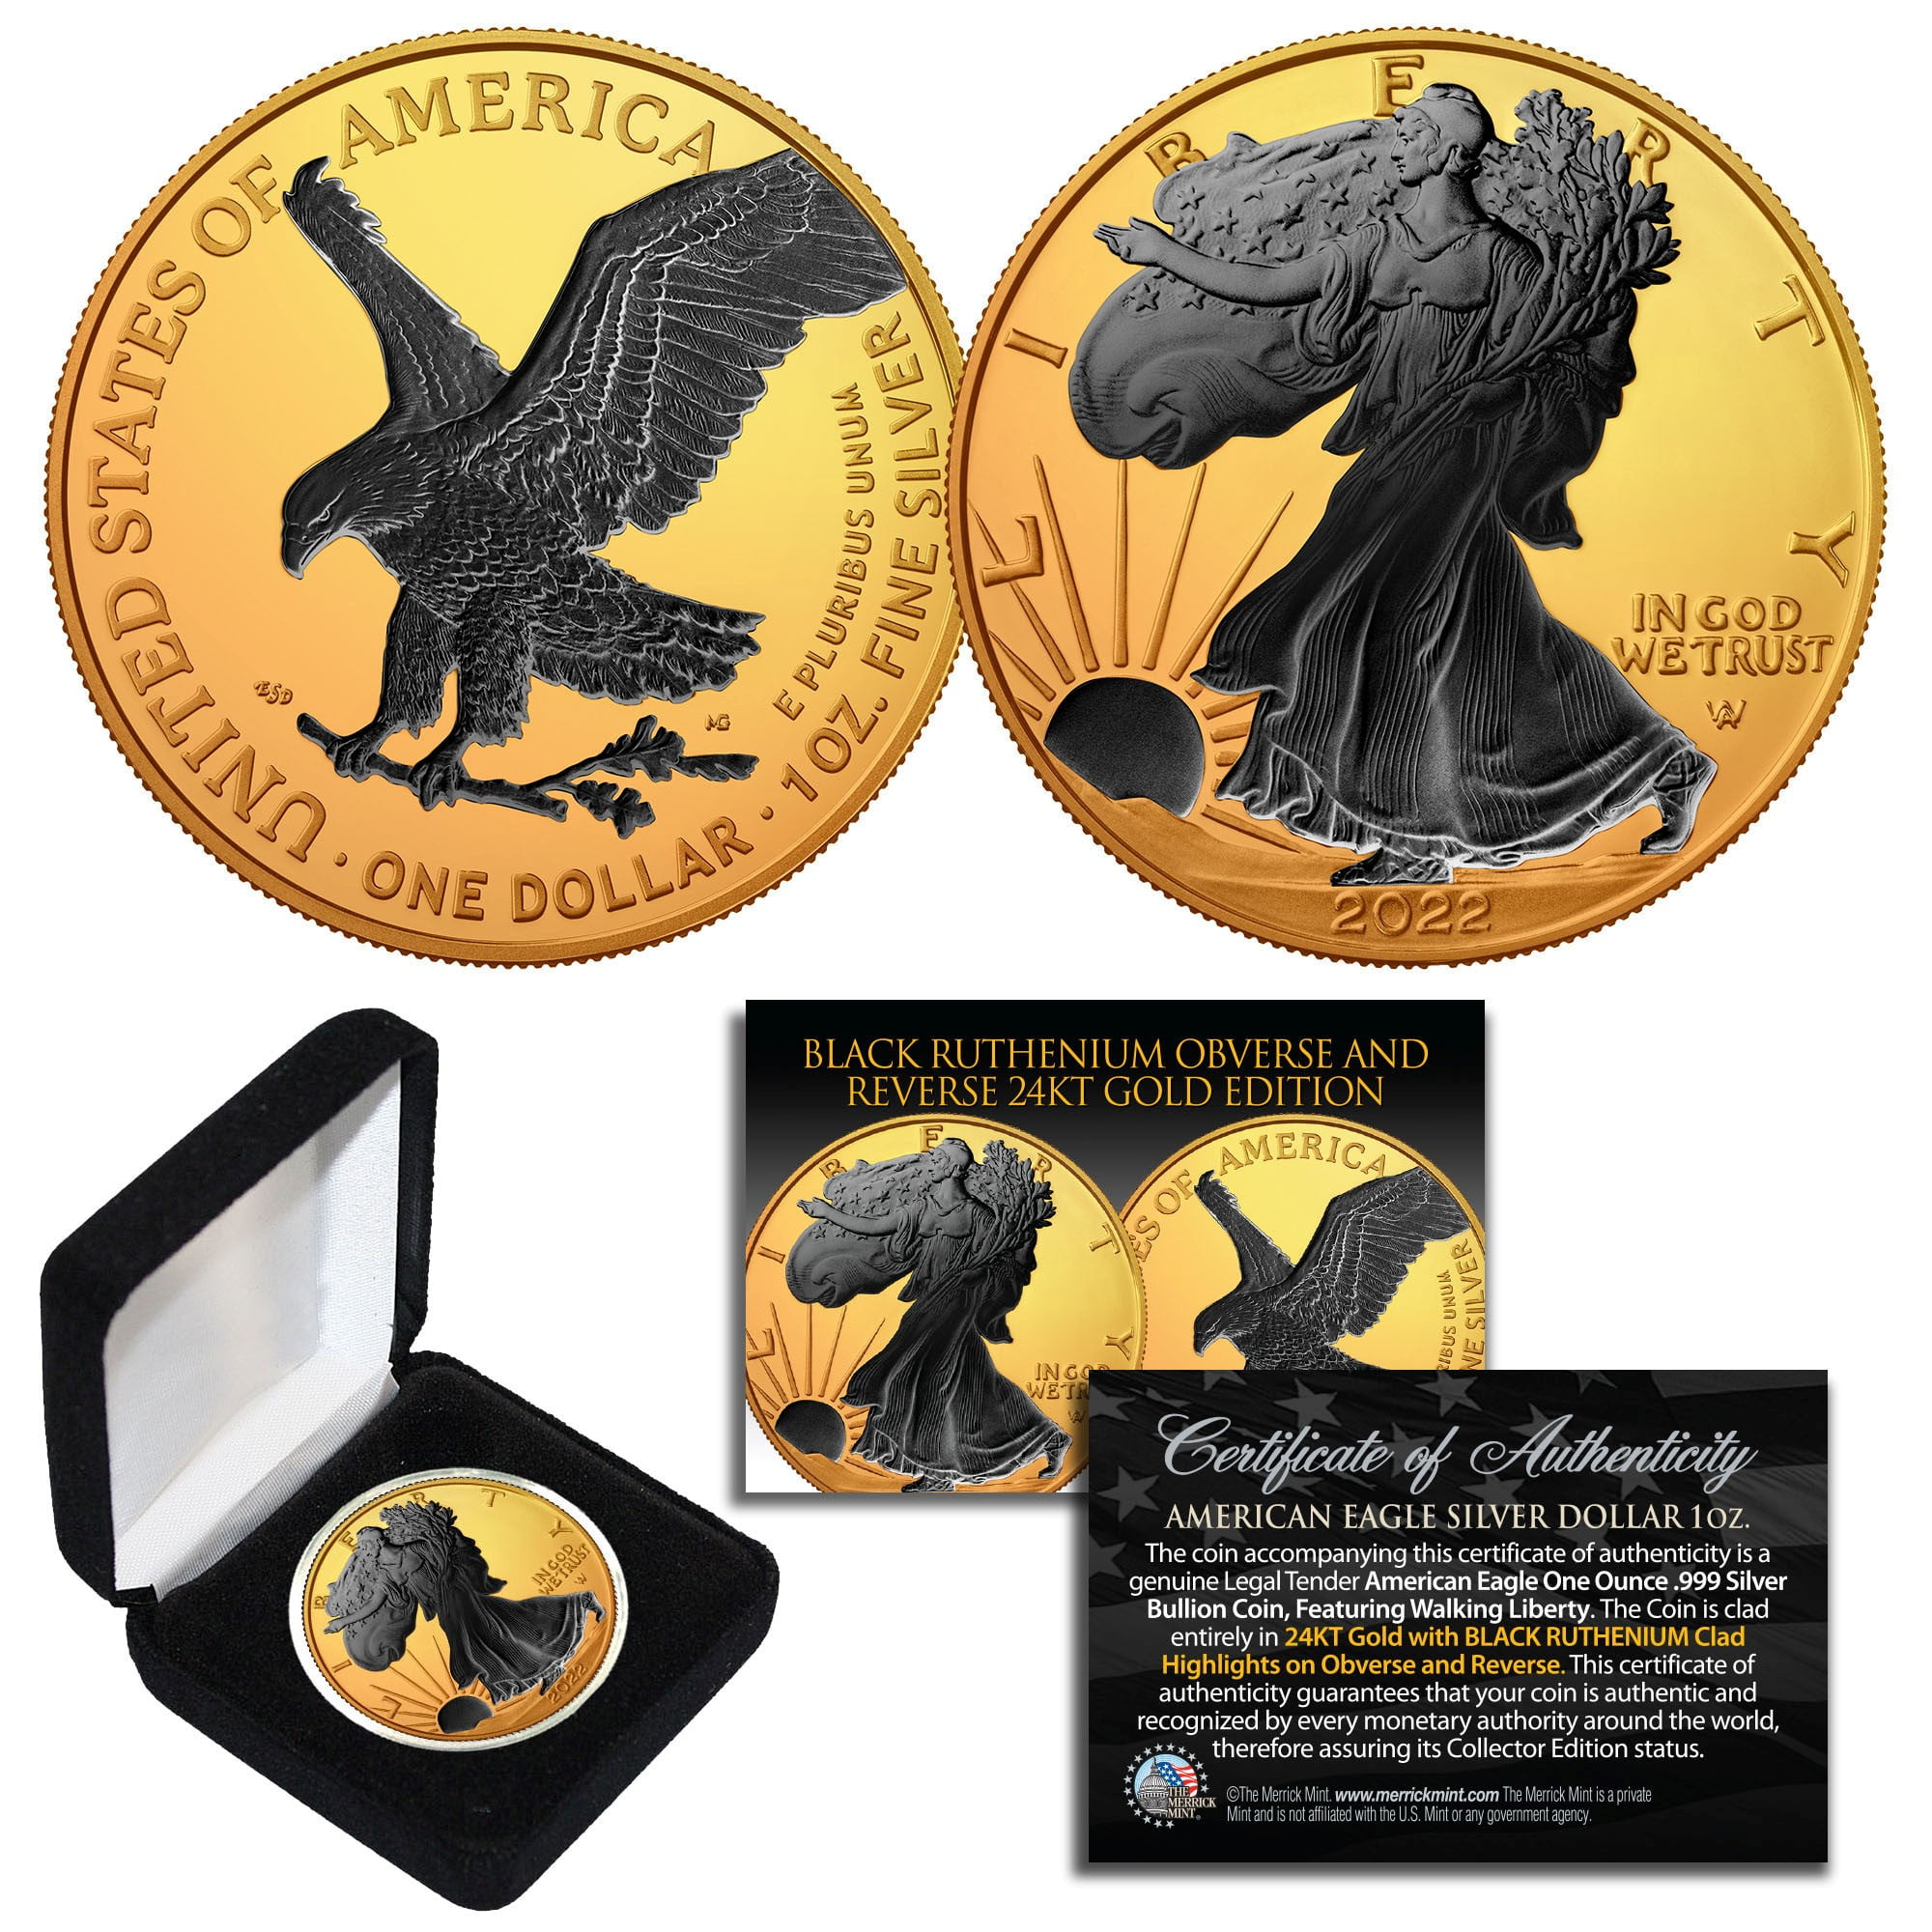 2019 1 Oz Silver $1 US TEXAS FLAG EAGLE Coin WITH 24K GOLD GILDED. 